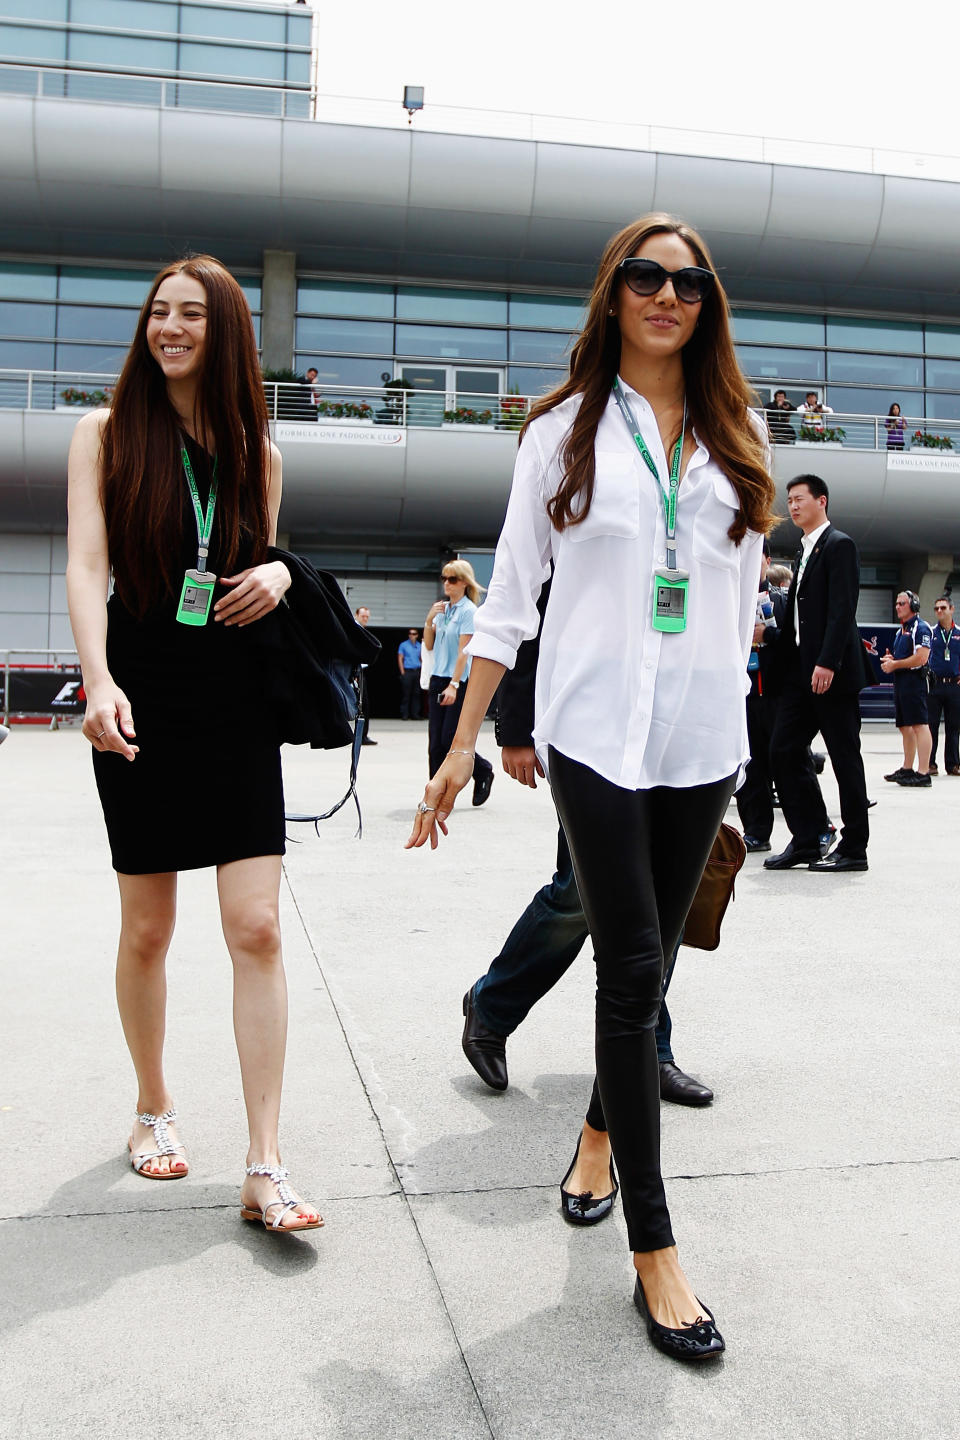 SHANGHAI, CHINA - APRIL 15: Jessica Michibata (R), girlfriend of Jenson Button of Great Britain and McLaren arrives in the paddock with her younger sister Angelica Michibata (L) before the Chinese Formula One Grand Prix at the Shanghai International Circuit on April 15, 2012 in Shanghai, China. (Photo by Paul Gilham/Getty Images)